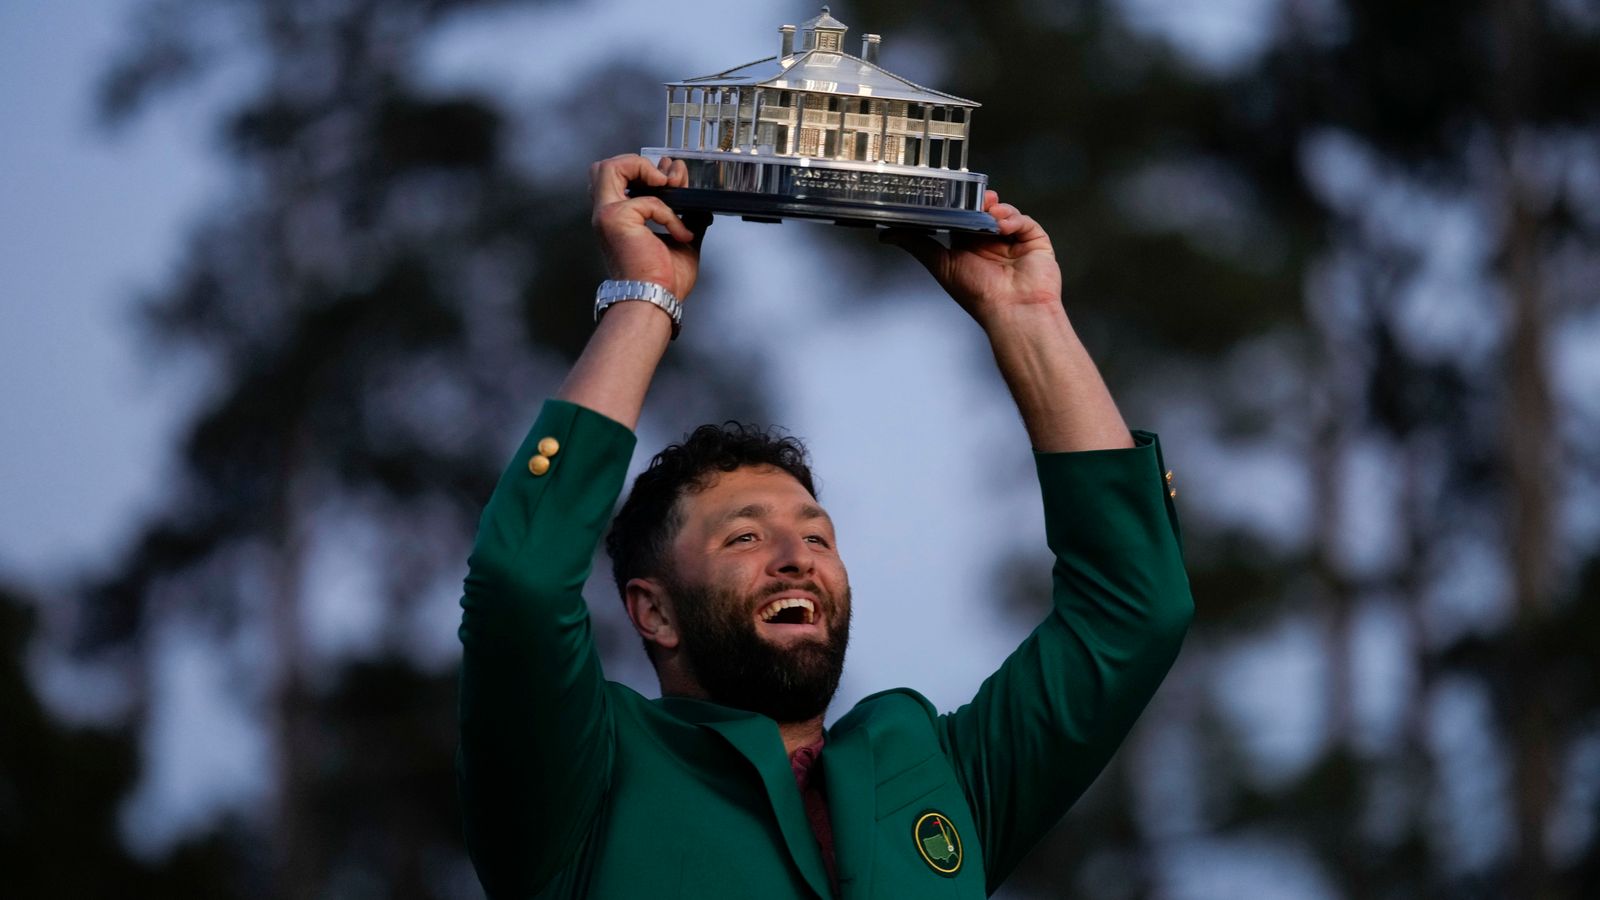  Spain's Jon Rahm pays tribute to Seve Ballesteros after Masters win